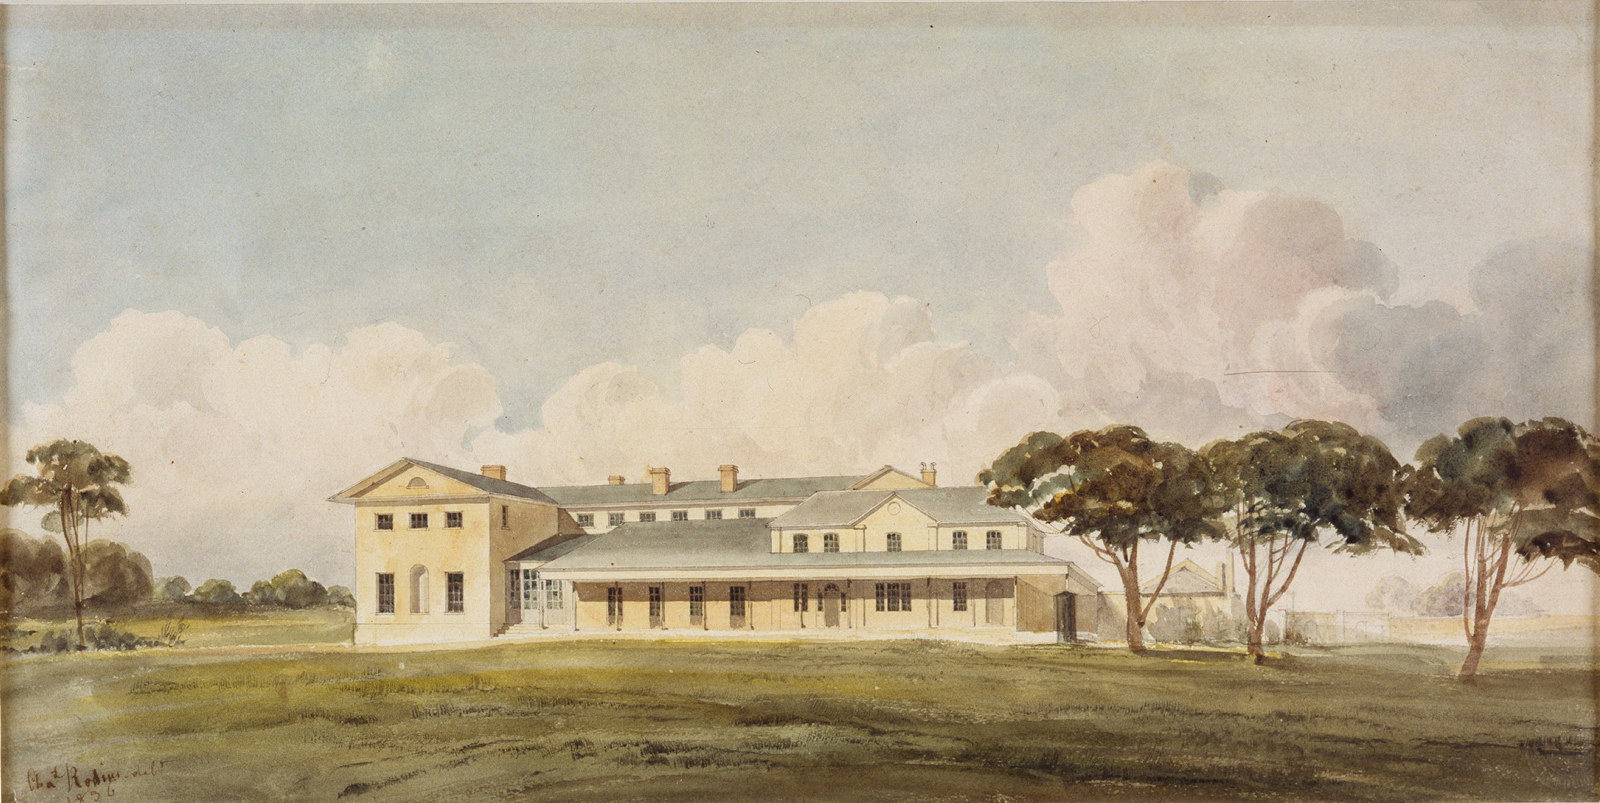 Painting of colonial era building.